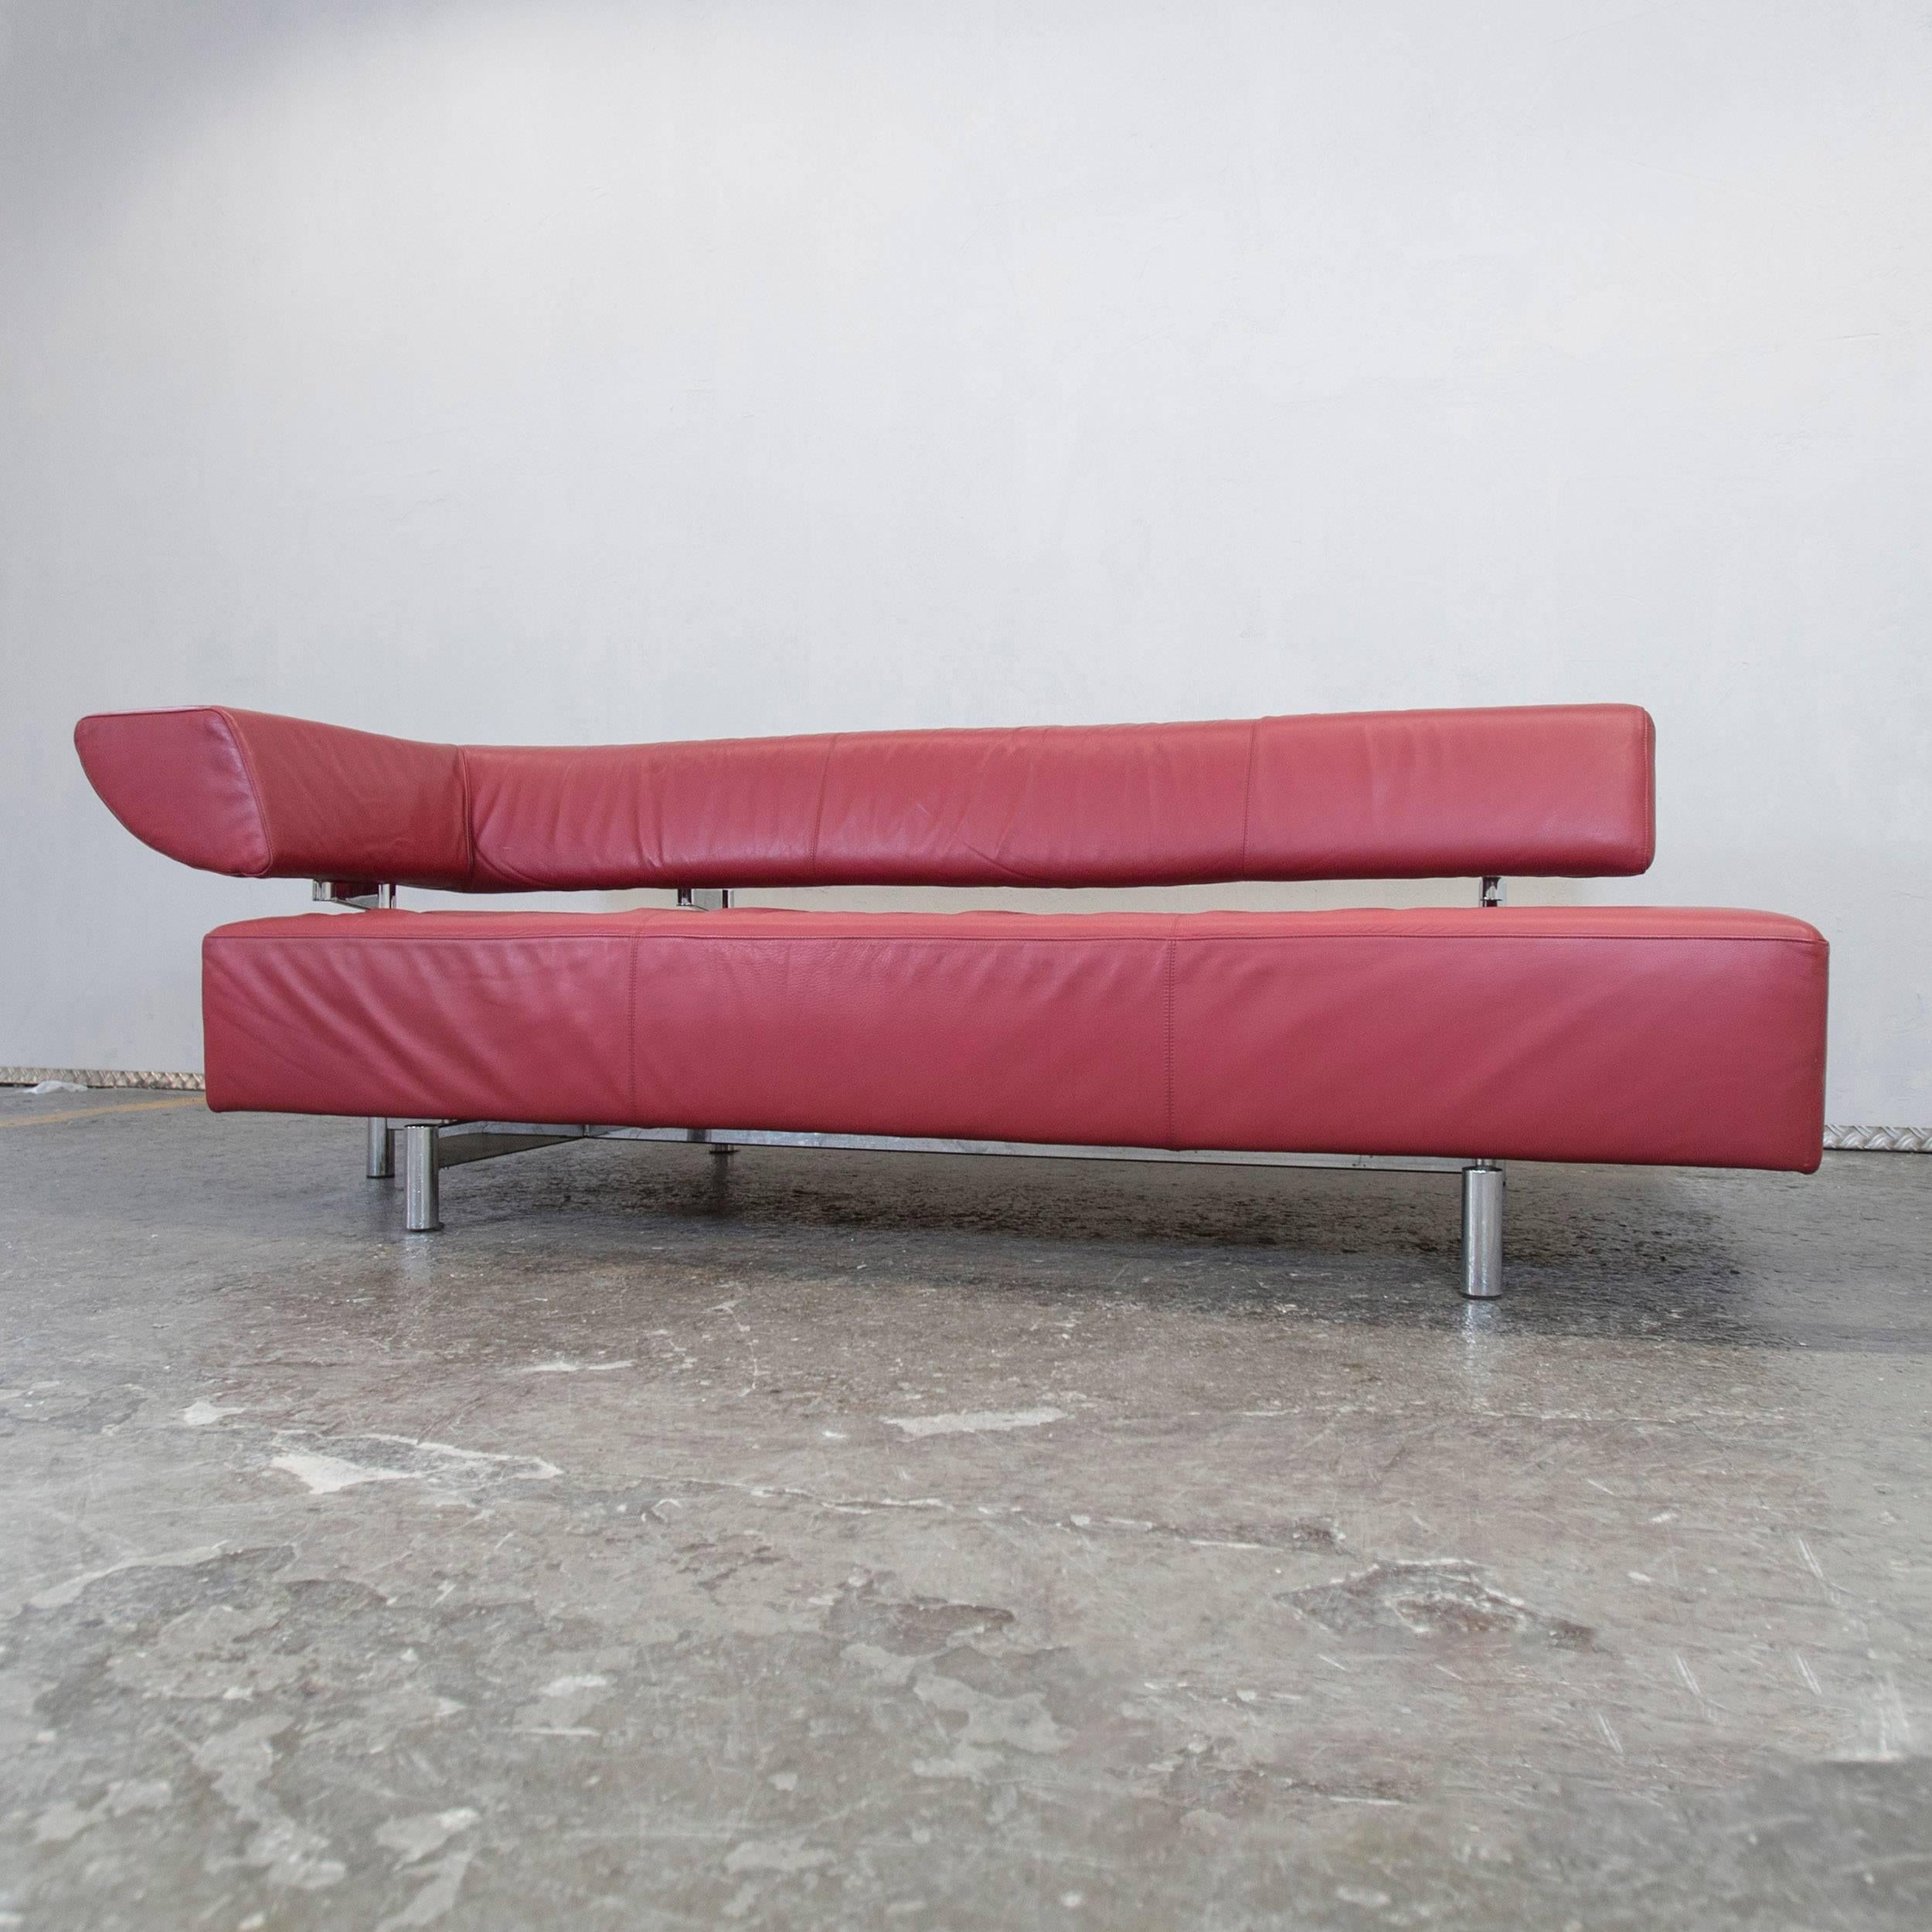 Red colored original COR Arthe designer leather sofa in a minimalistic and modern design, with a convenient function.